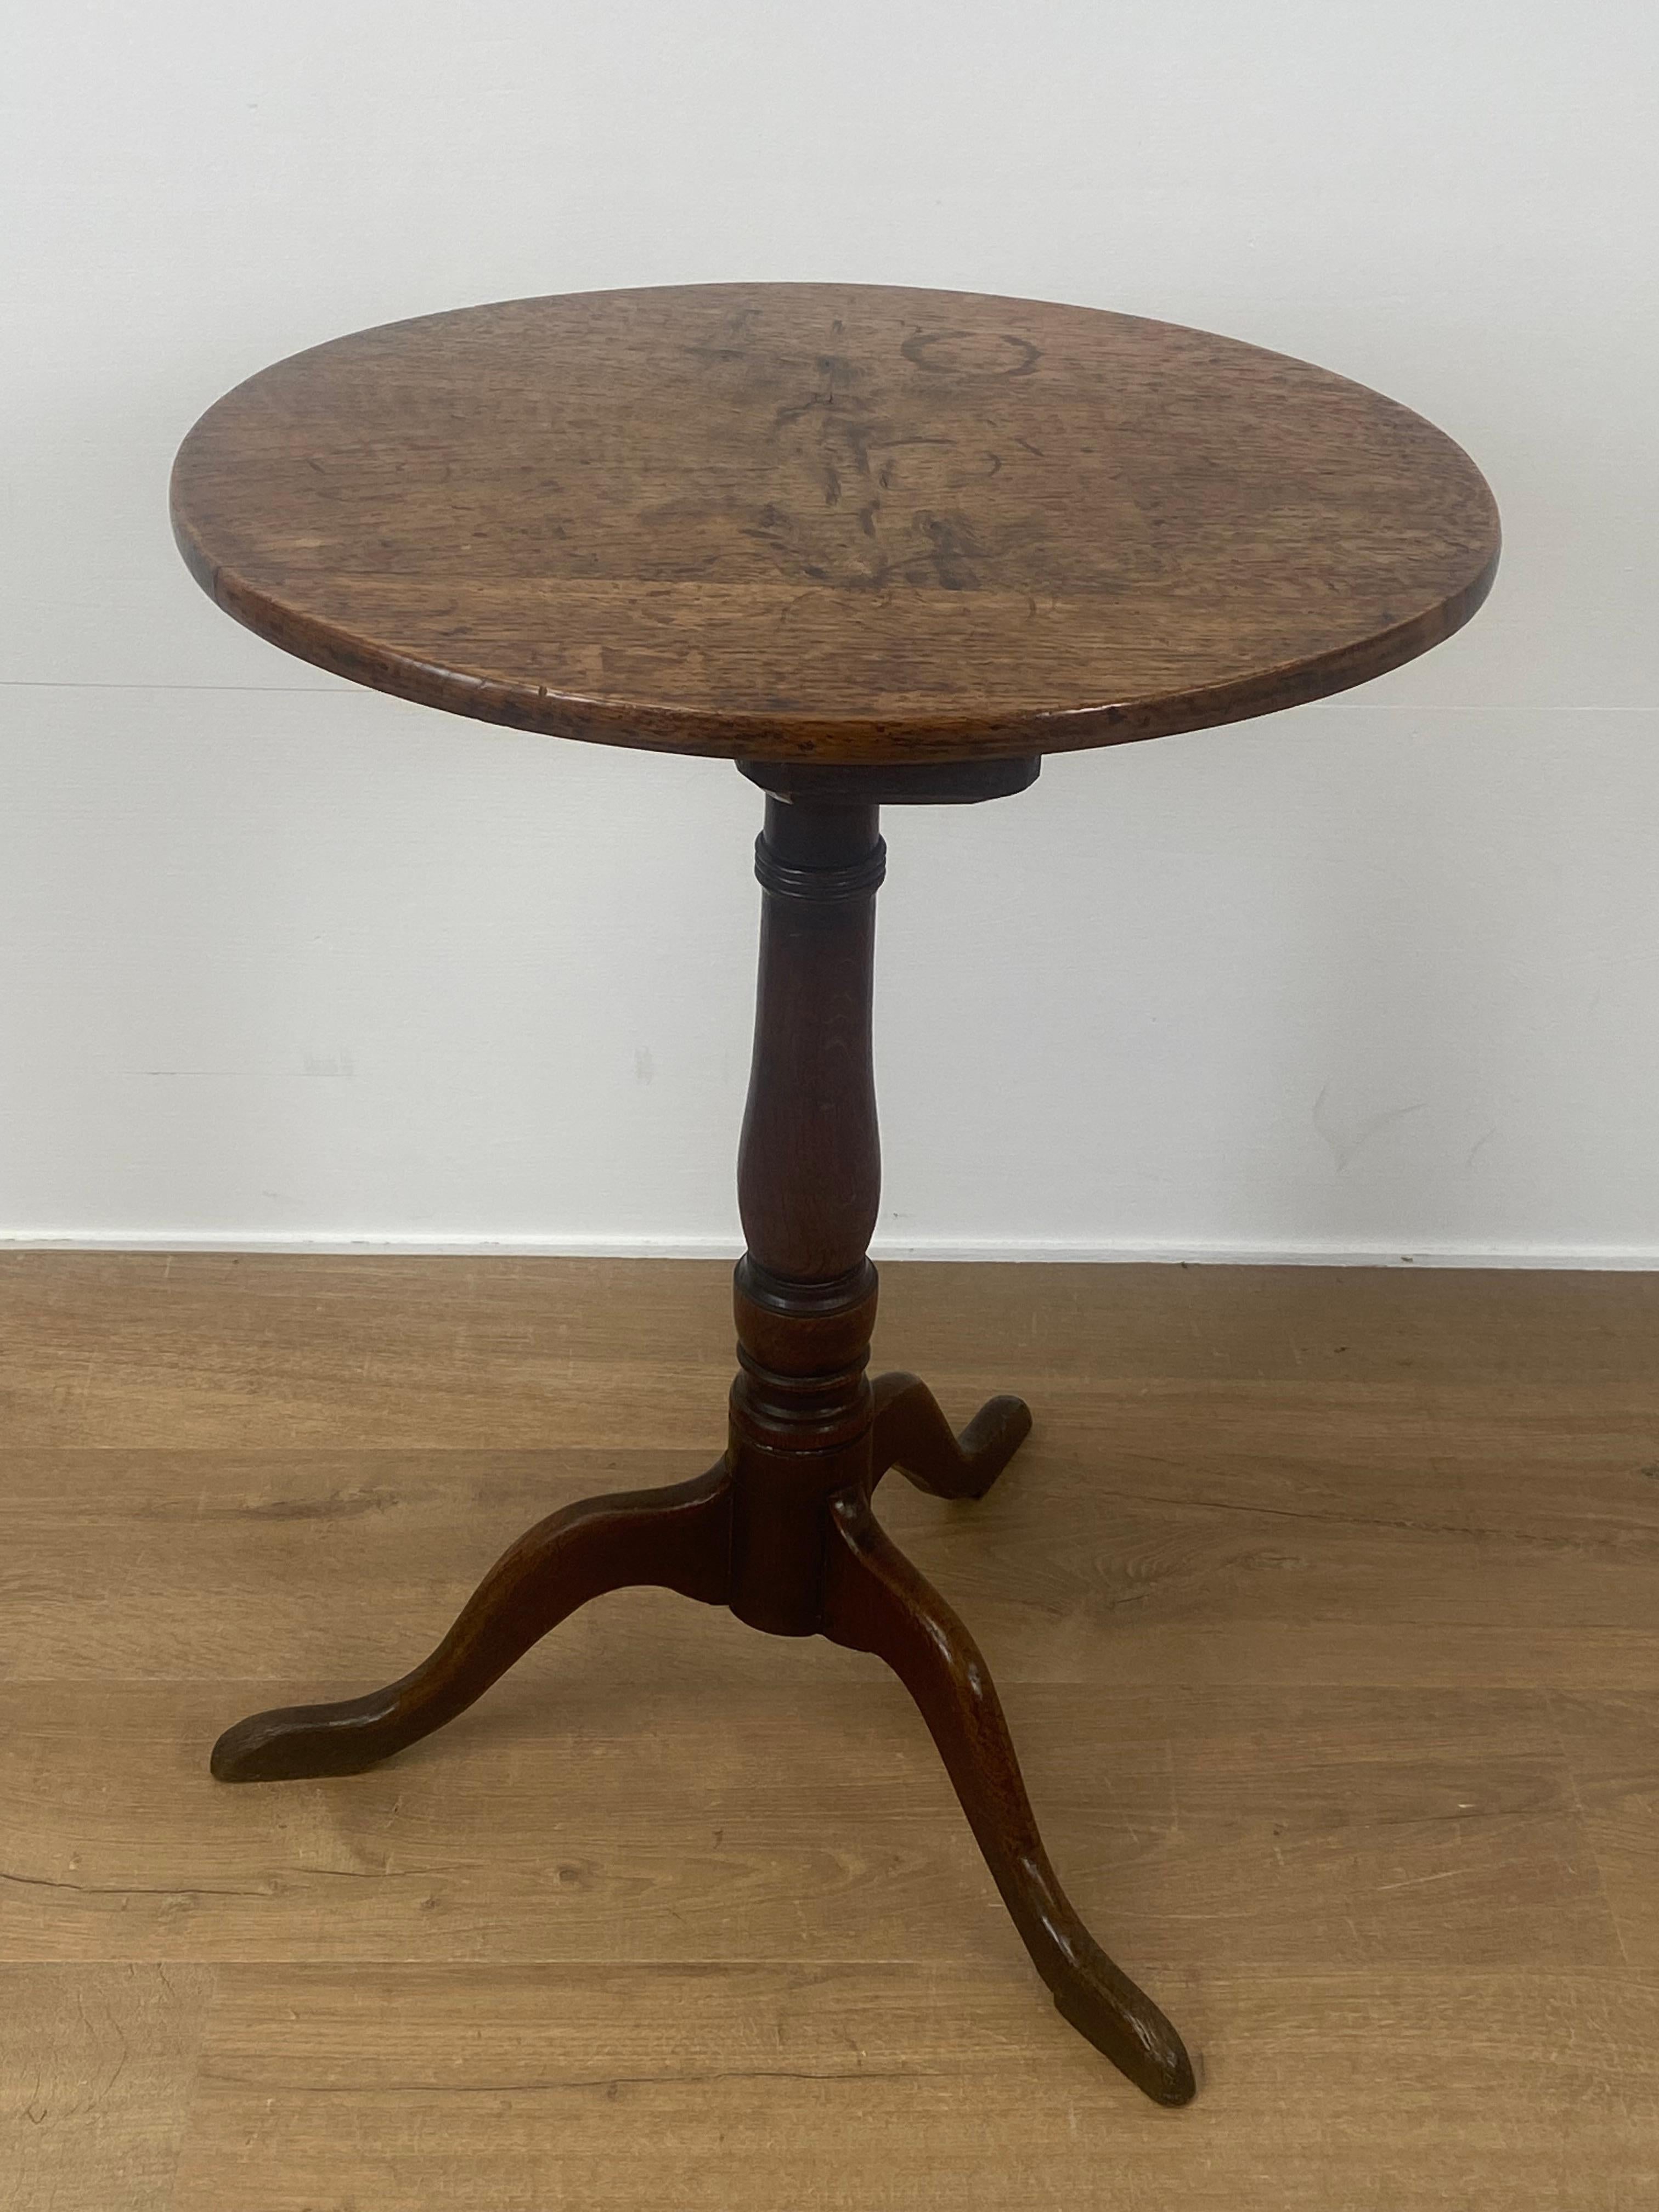 Elegant, small English Tripod Table in Blond Oak,
late 18 th Century, good old patina and wear of the Oak Wood,
to be used for different purposes